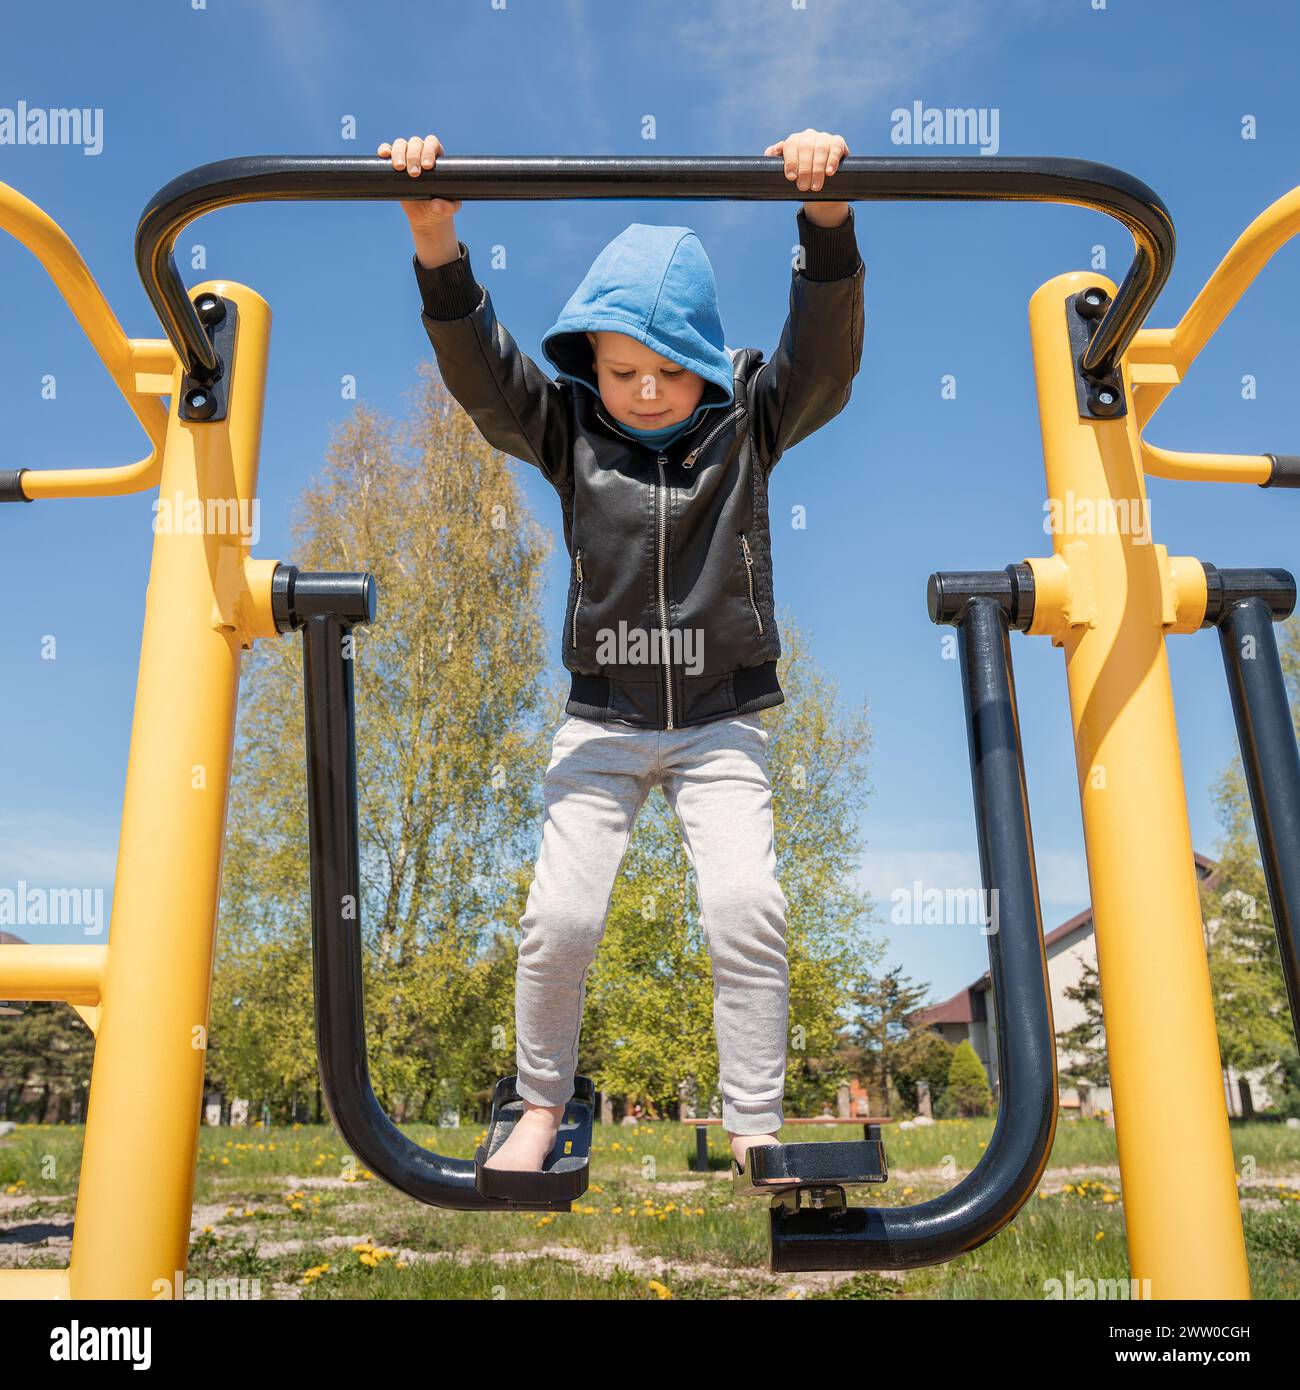 A little boy is exercising outdoors on an air walker gym equipment. Stock Photo